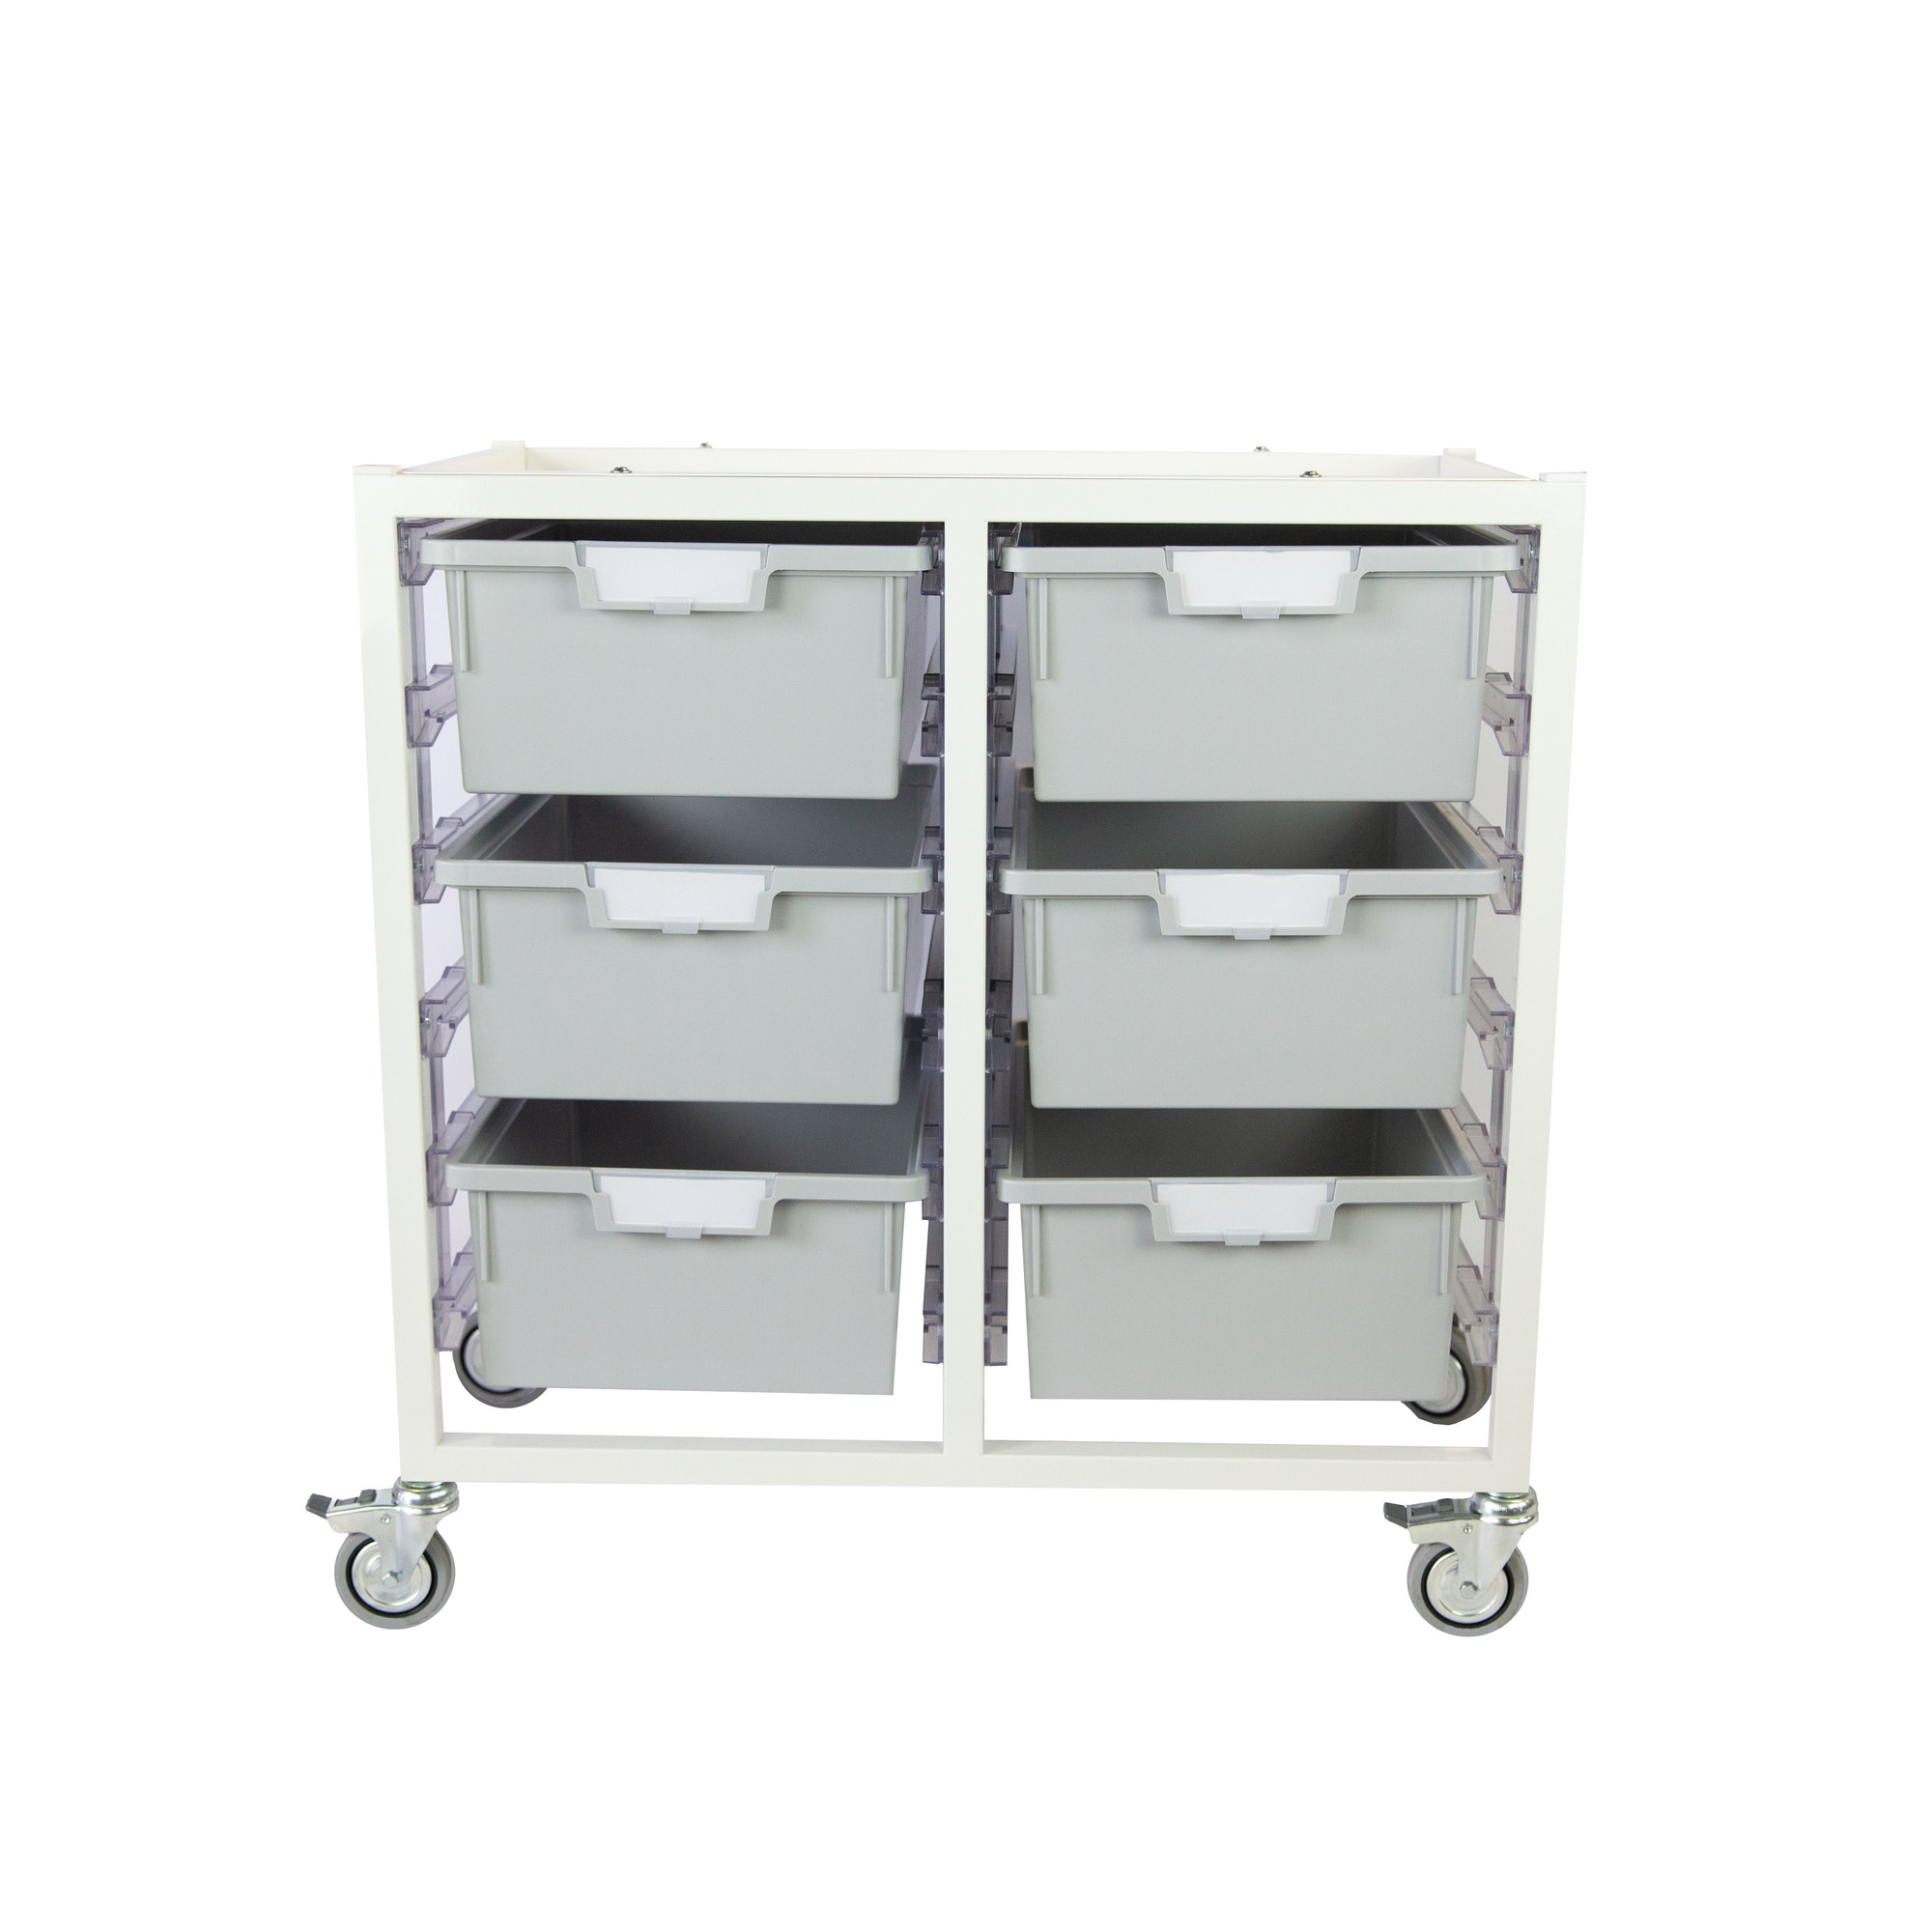 Certwood, Swift Cart Slim-White with 6 Gray Trays, Included (qty.) 1, Material Steel, Height 29.5 in, Model CE2101WH-6DLG